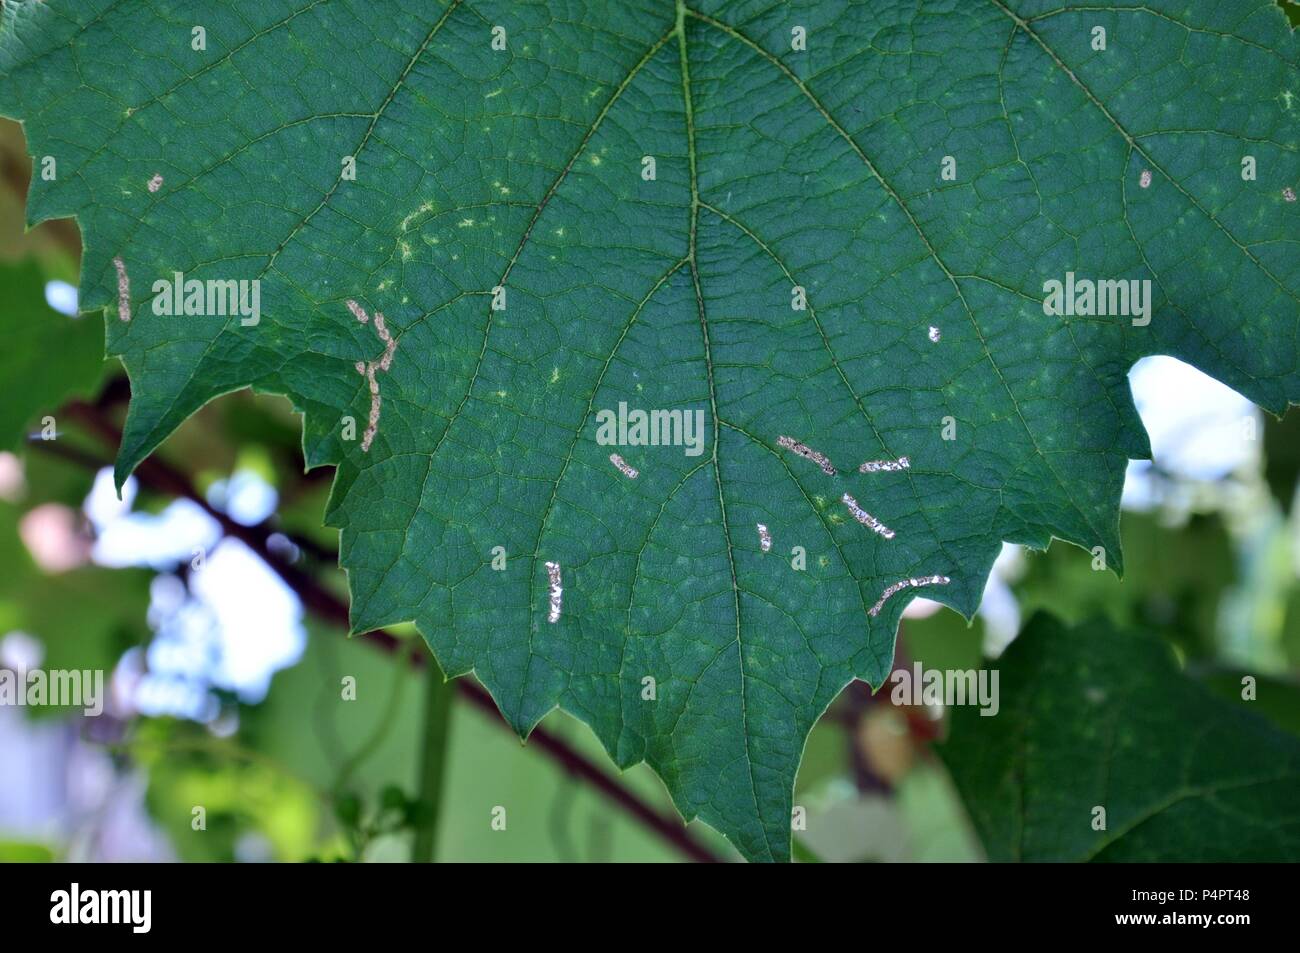 Green vine leaves eaten by pests, close up Stock Photo